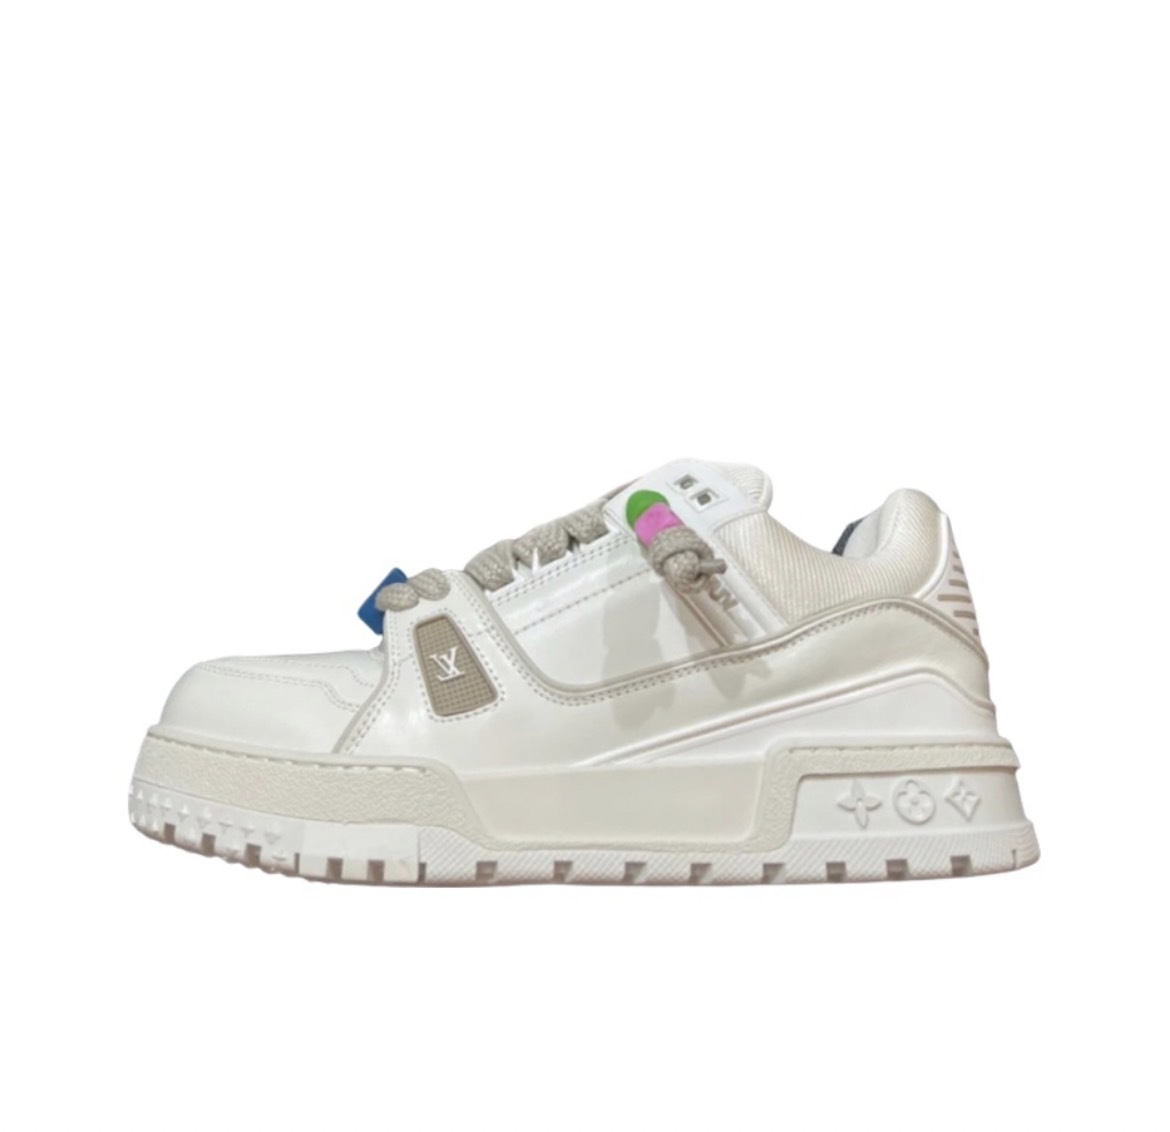 LV TRAINER MAXI New Candy Chubby Shoes White Louis Vuit